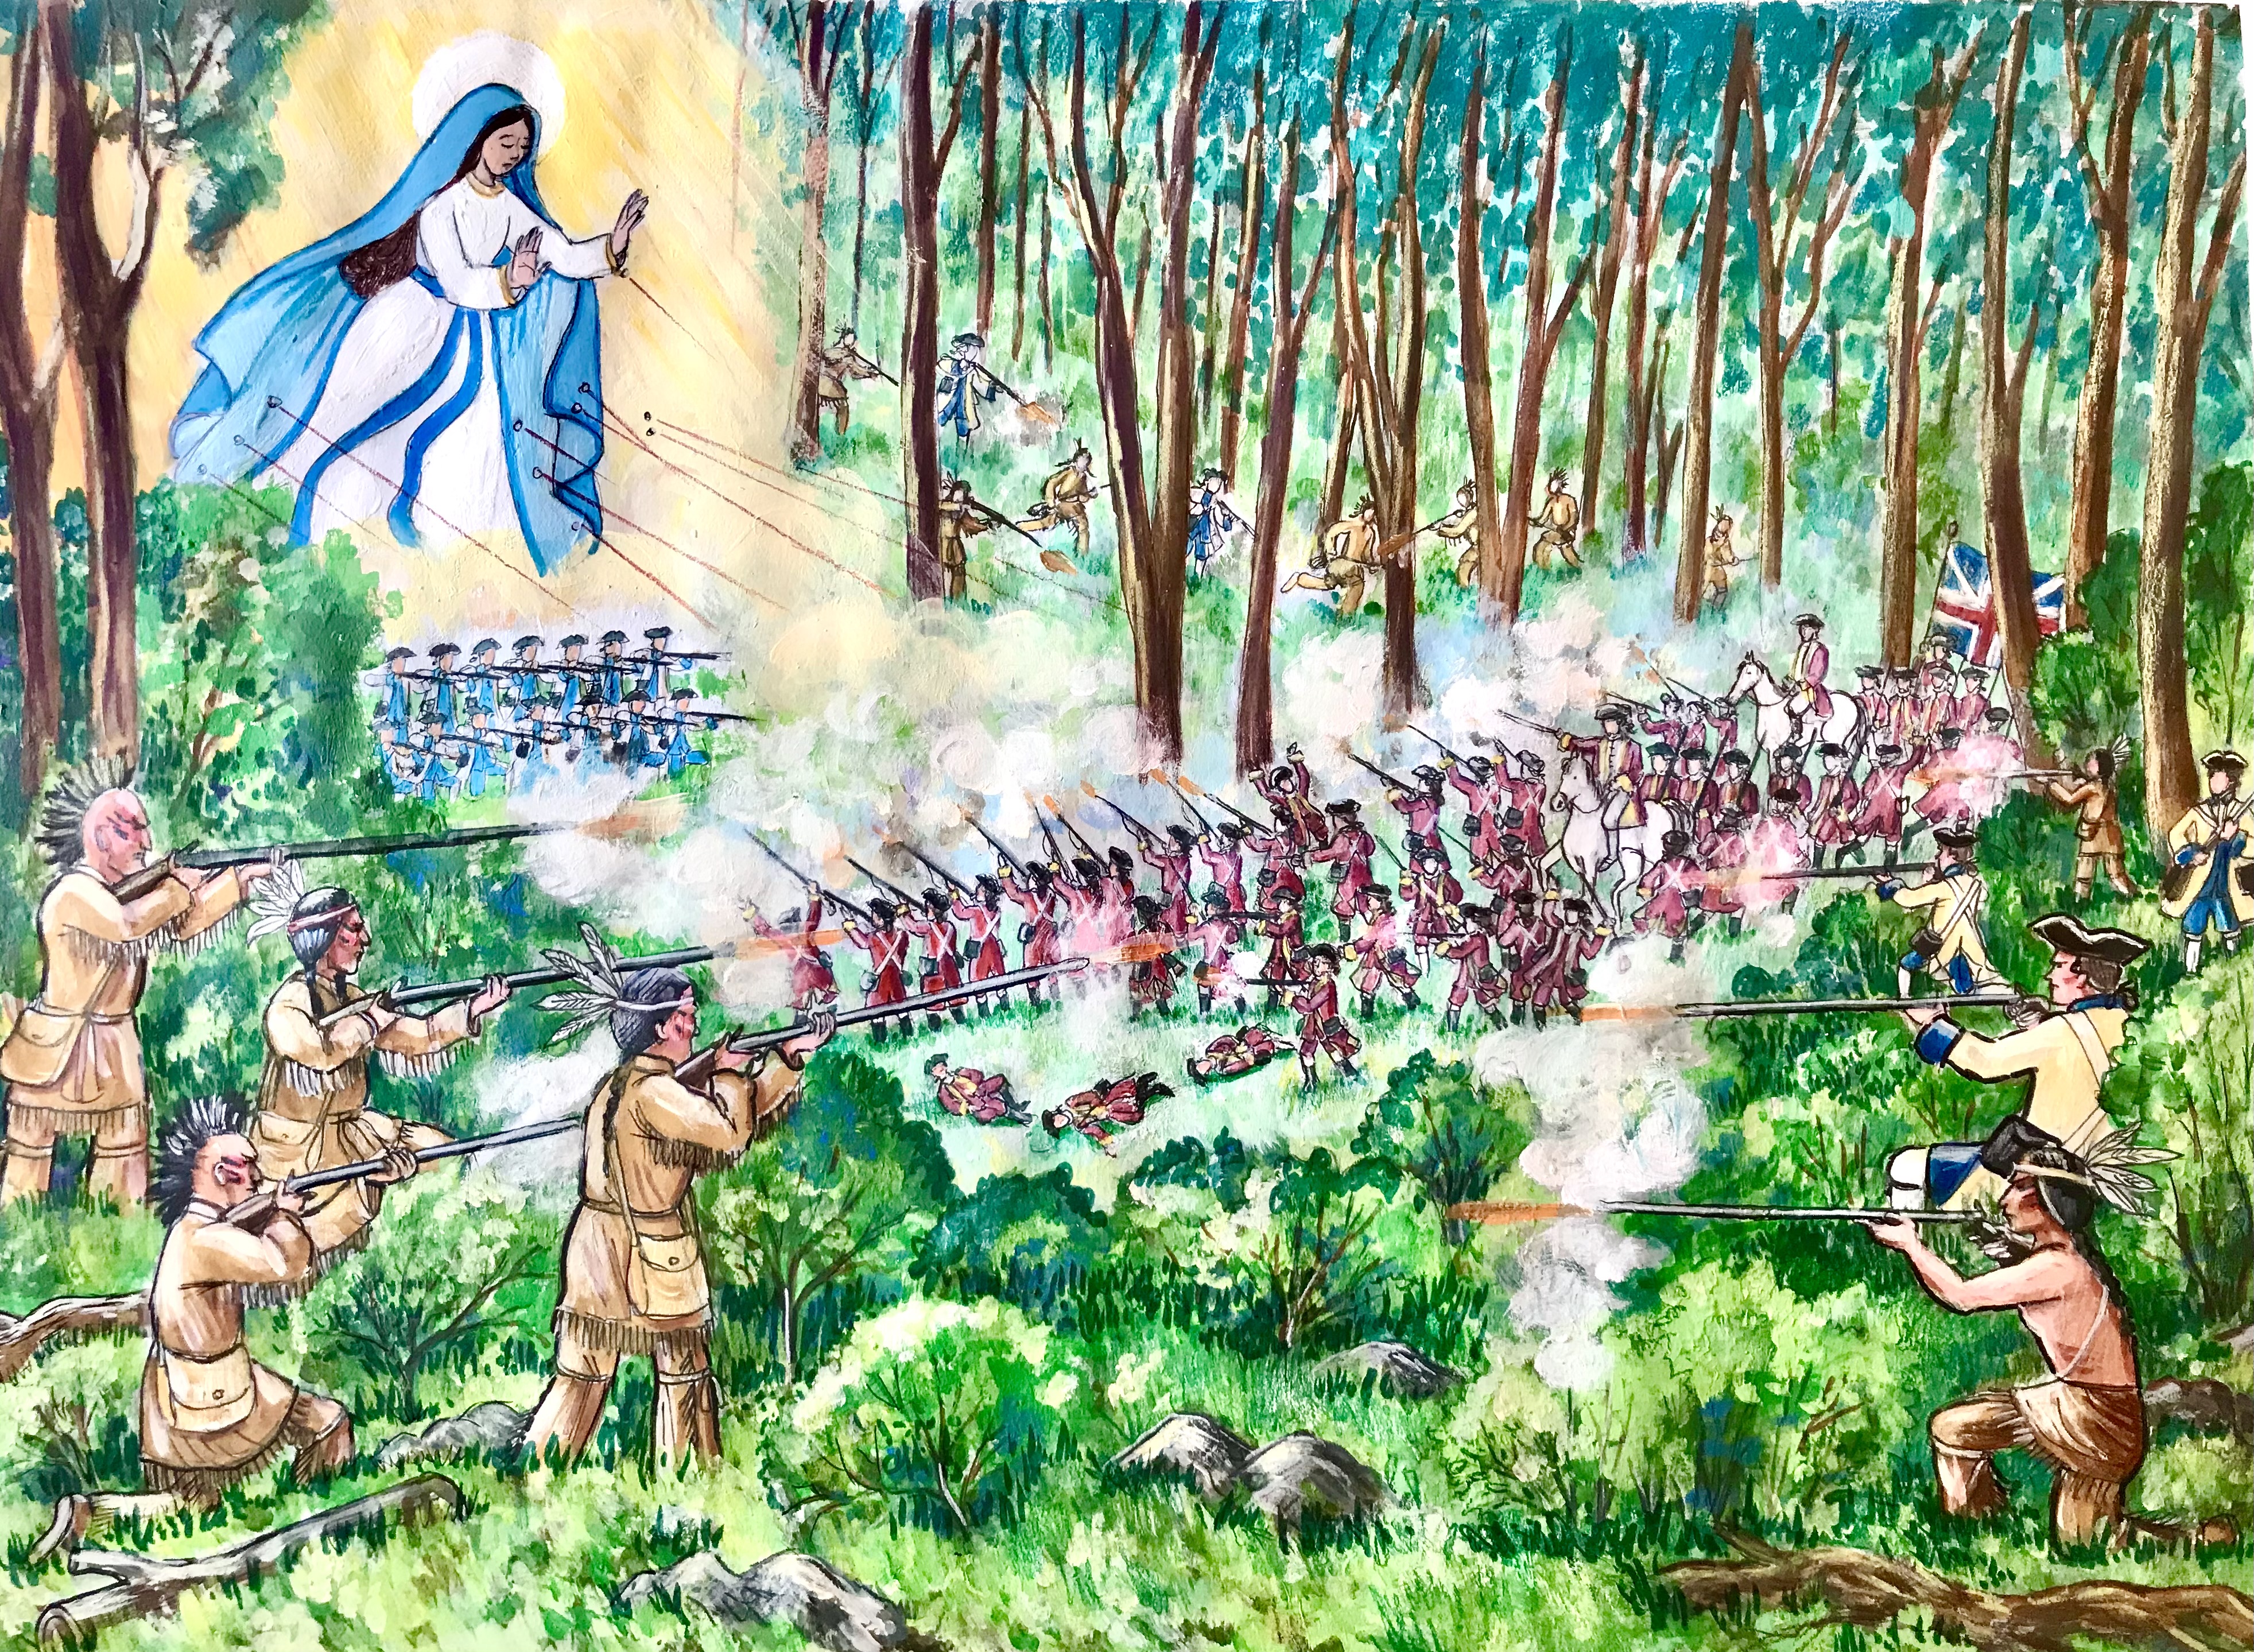 The intervention of Mary at the battle of Monongahela Image